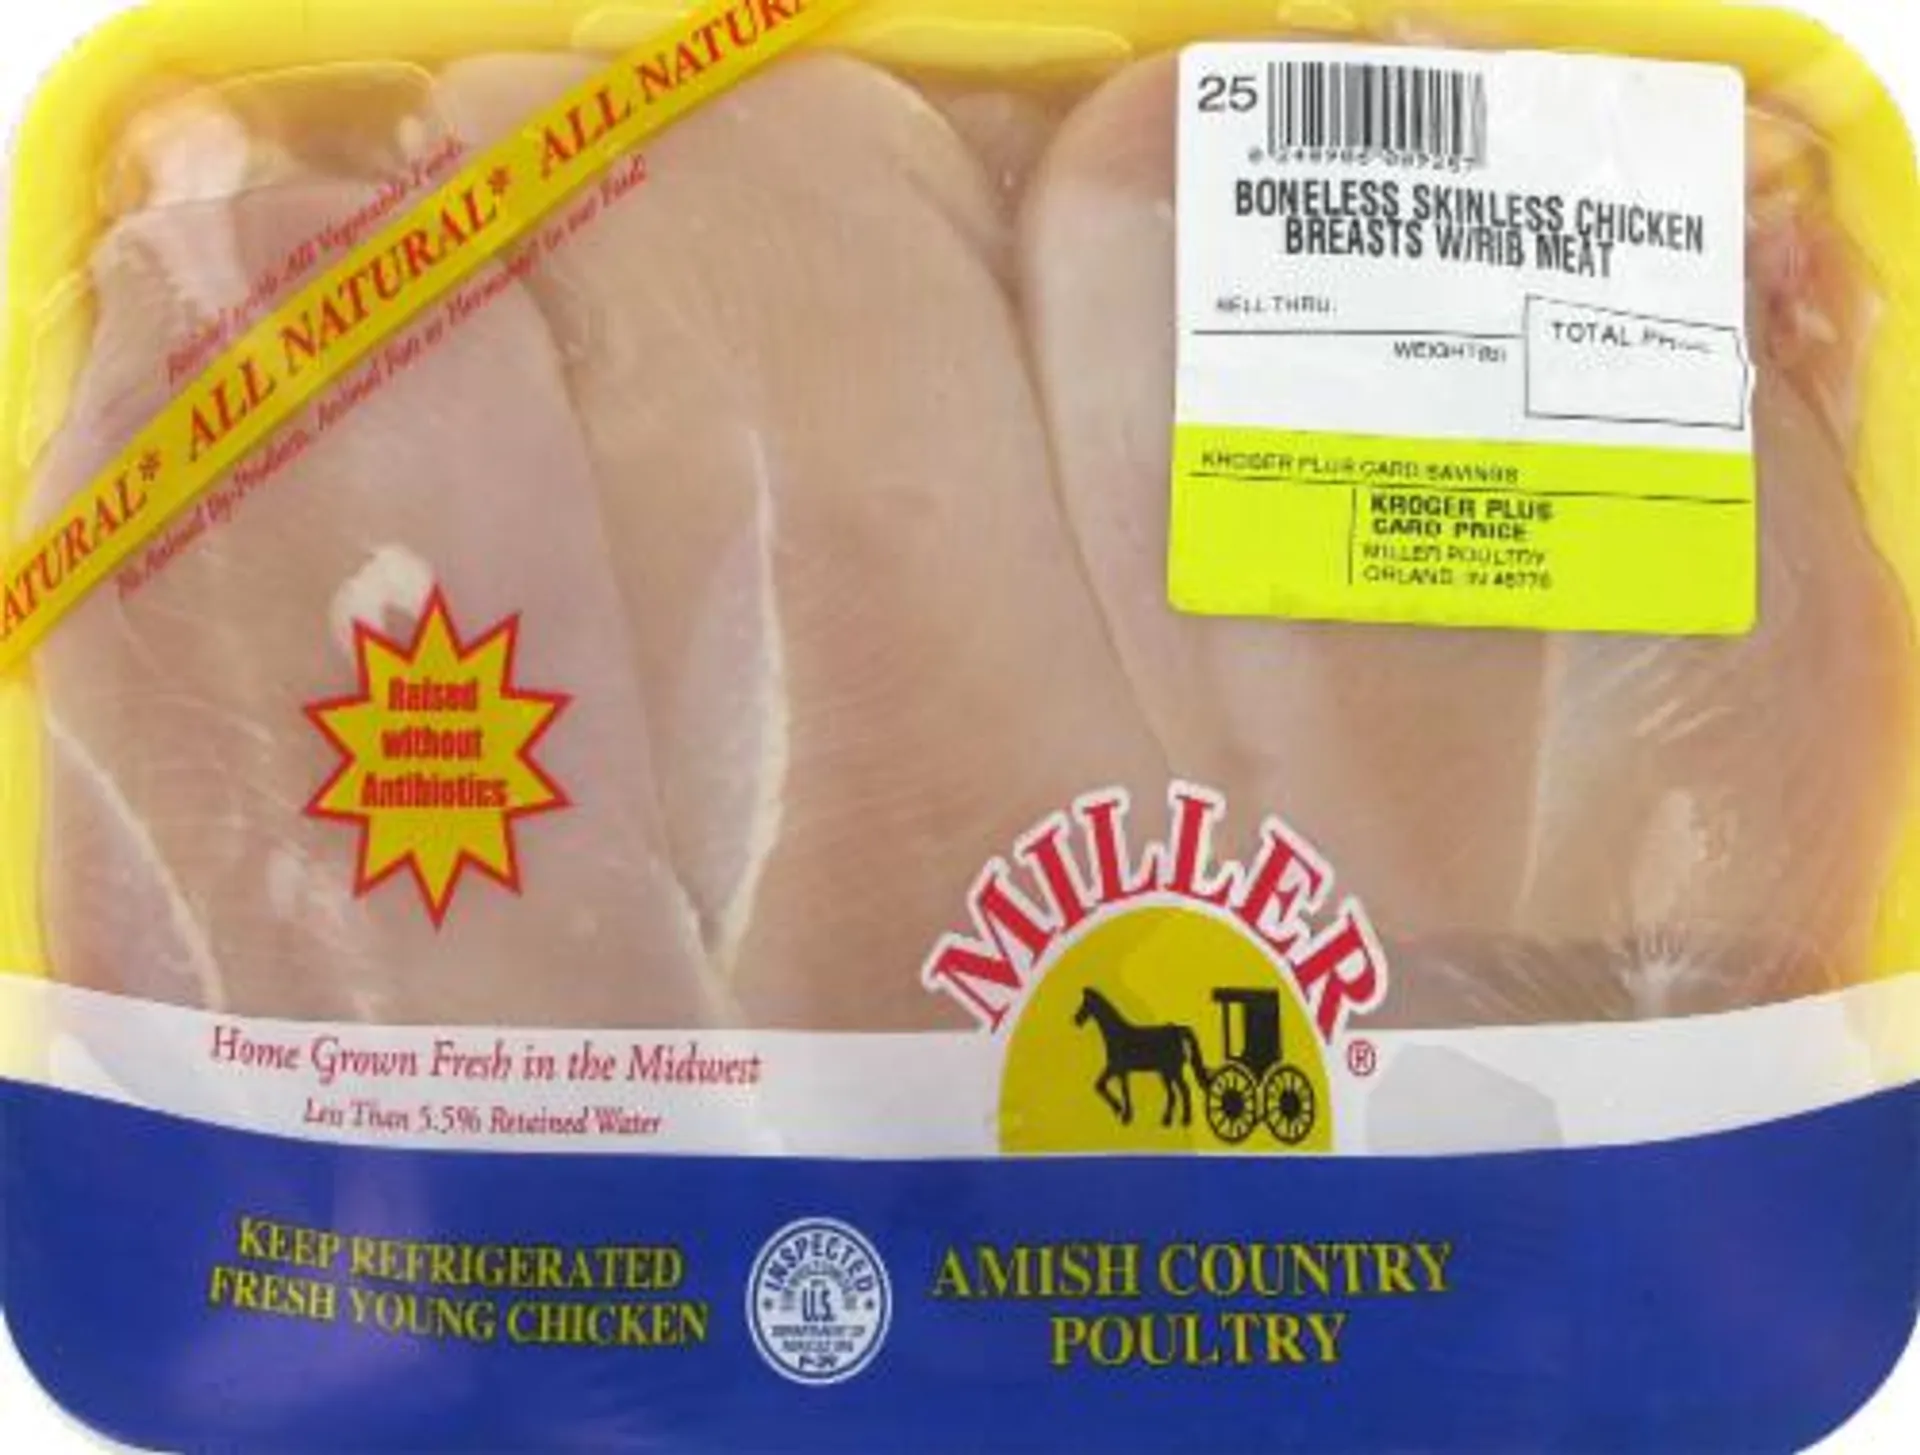 Miller Boneless Skinless Chicken Breasts with Rib Meat (3 per Pack)